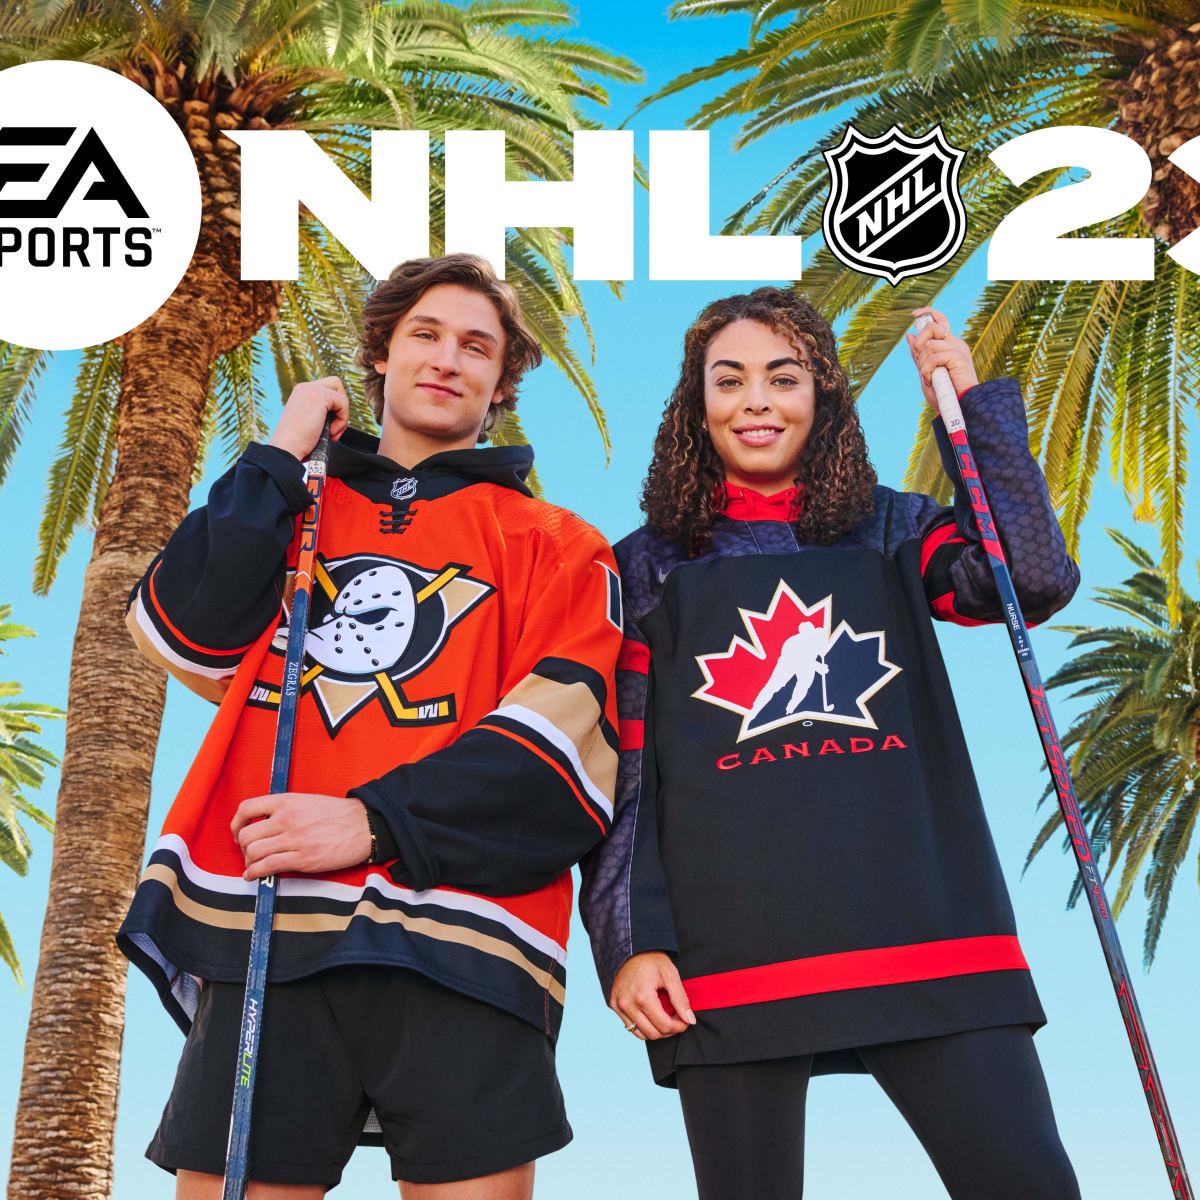 NHL 23 Team of the Year has been revealed